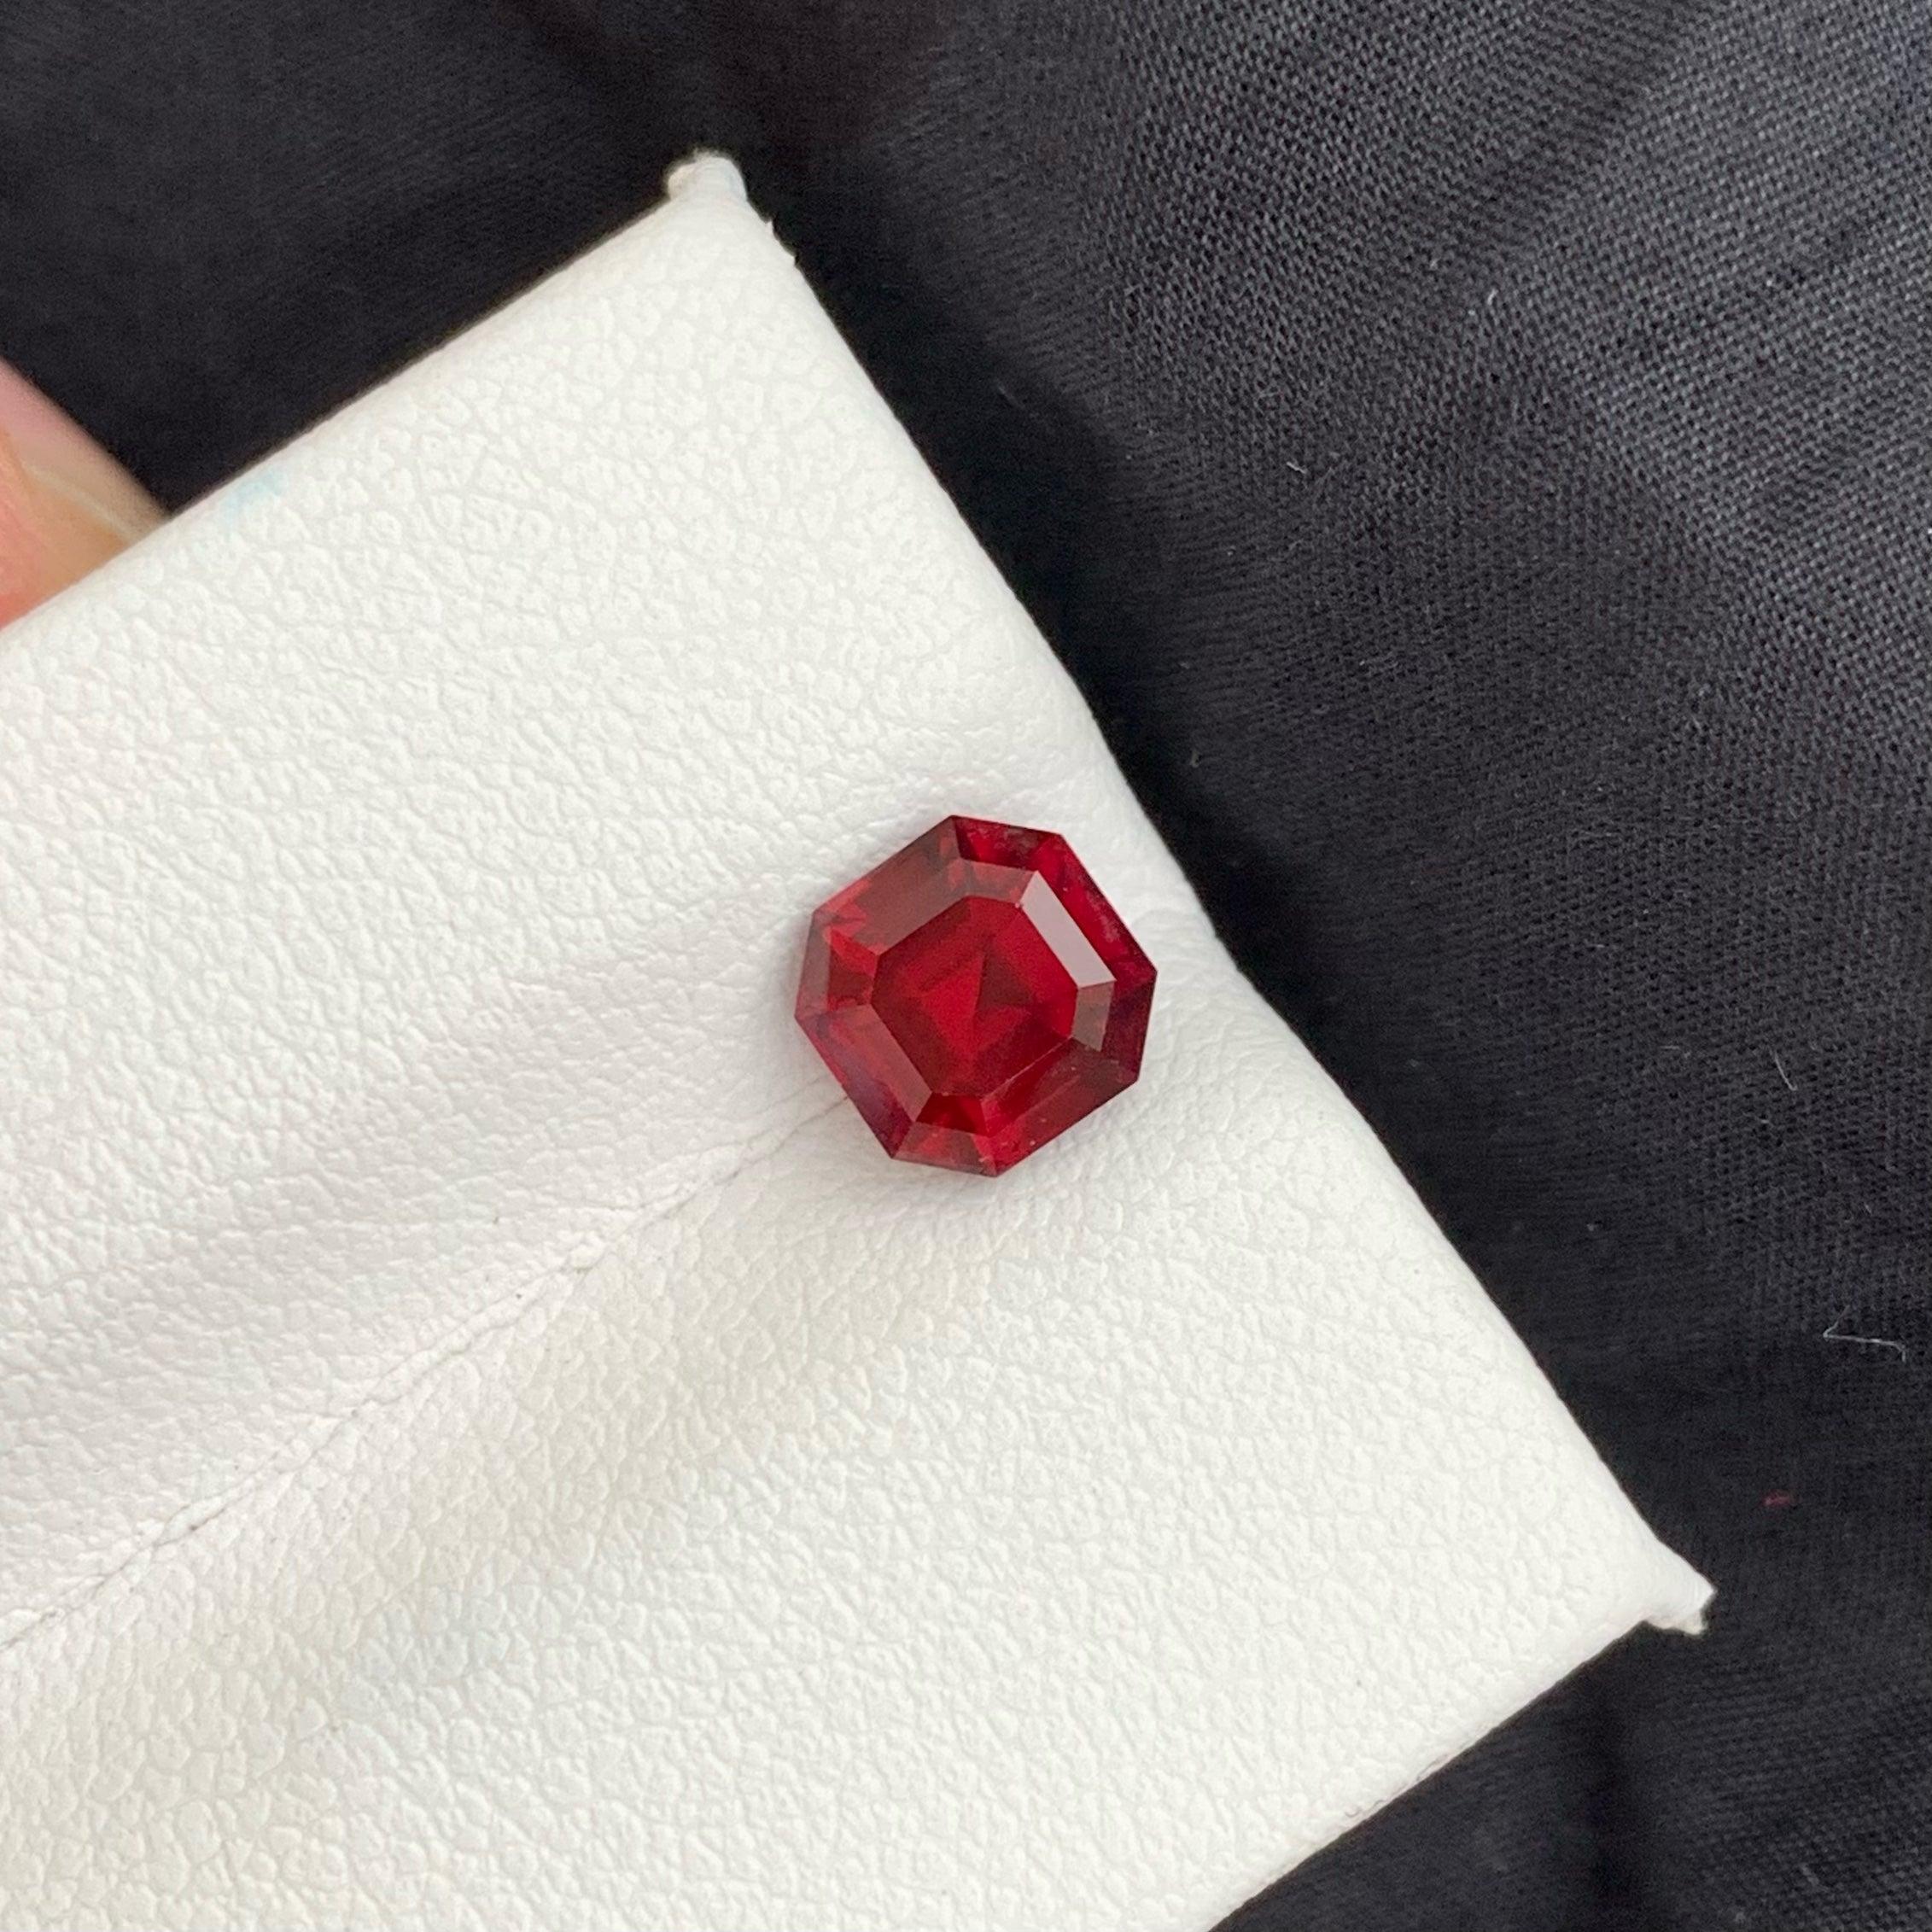 Fantastic Natural Loose Rhodolite Garnet, available For sale at wholesale price Natural High Quality 1.70 Carats Octagon Shape, VVS Clarity Loose Garnet From Malawi.

Product Information:
GEMSTONE NAME: Fantastic Natural Loose Rhodolite